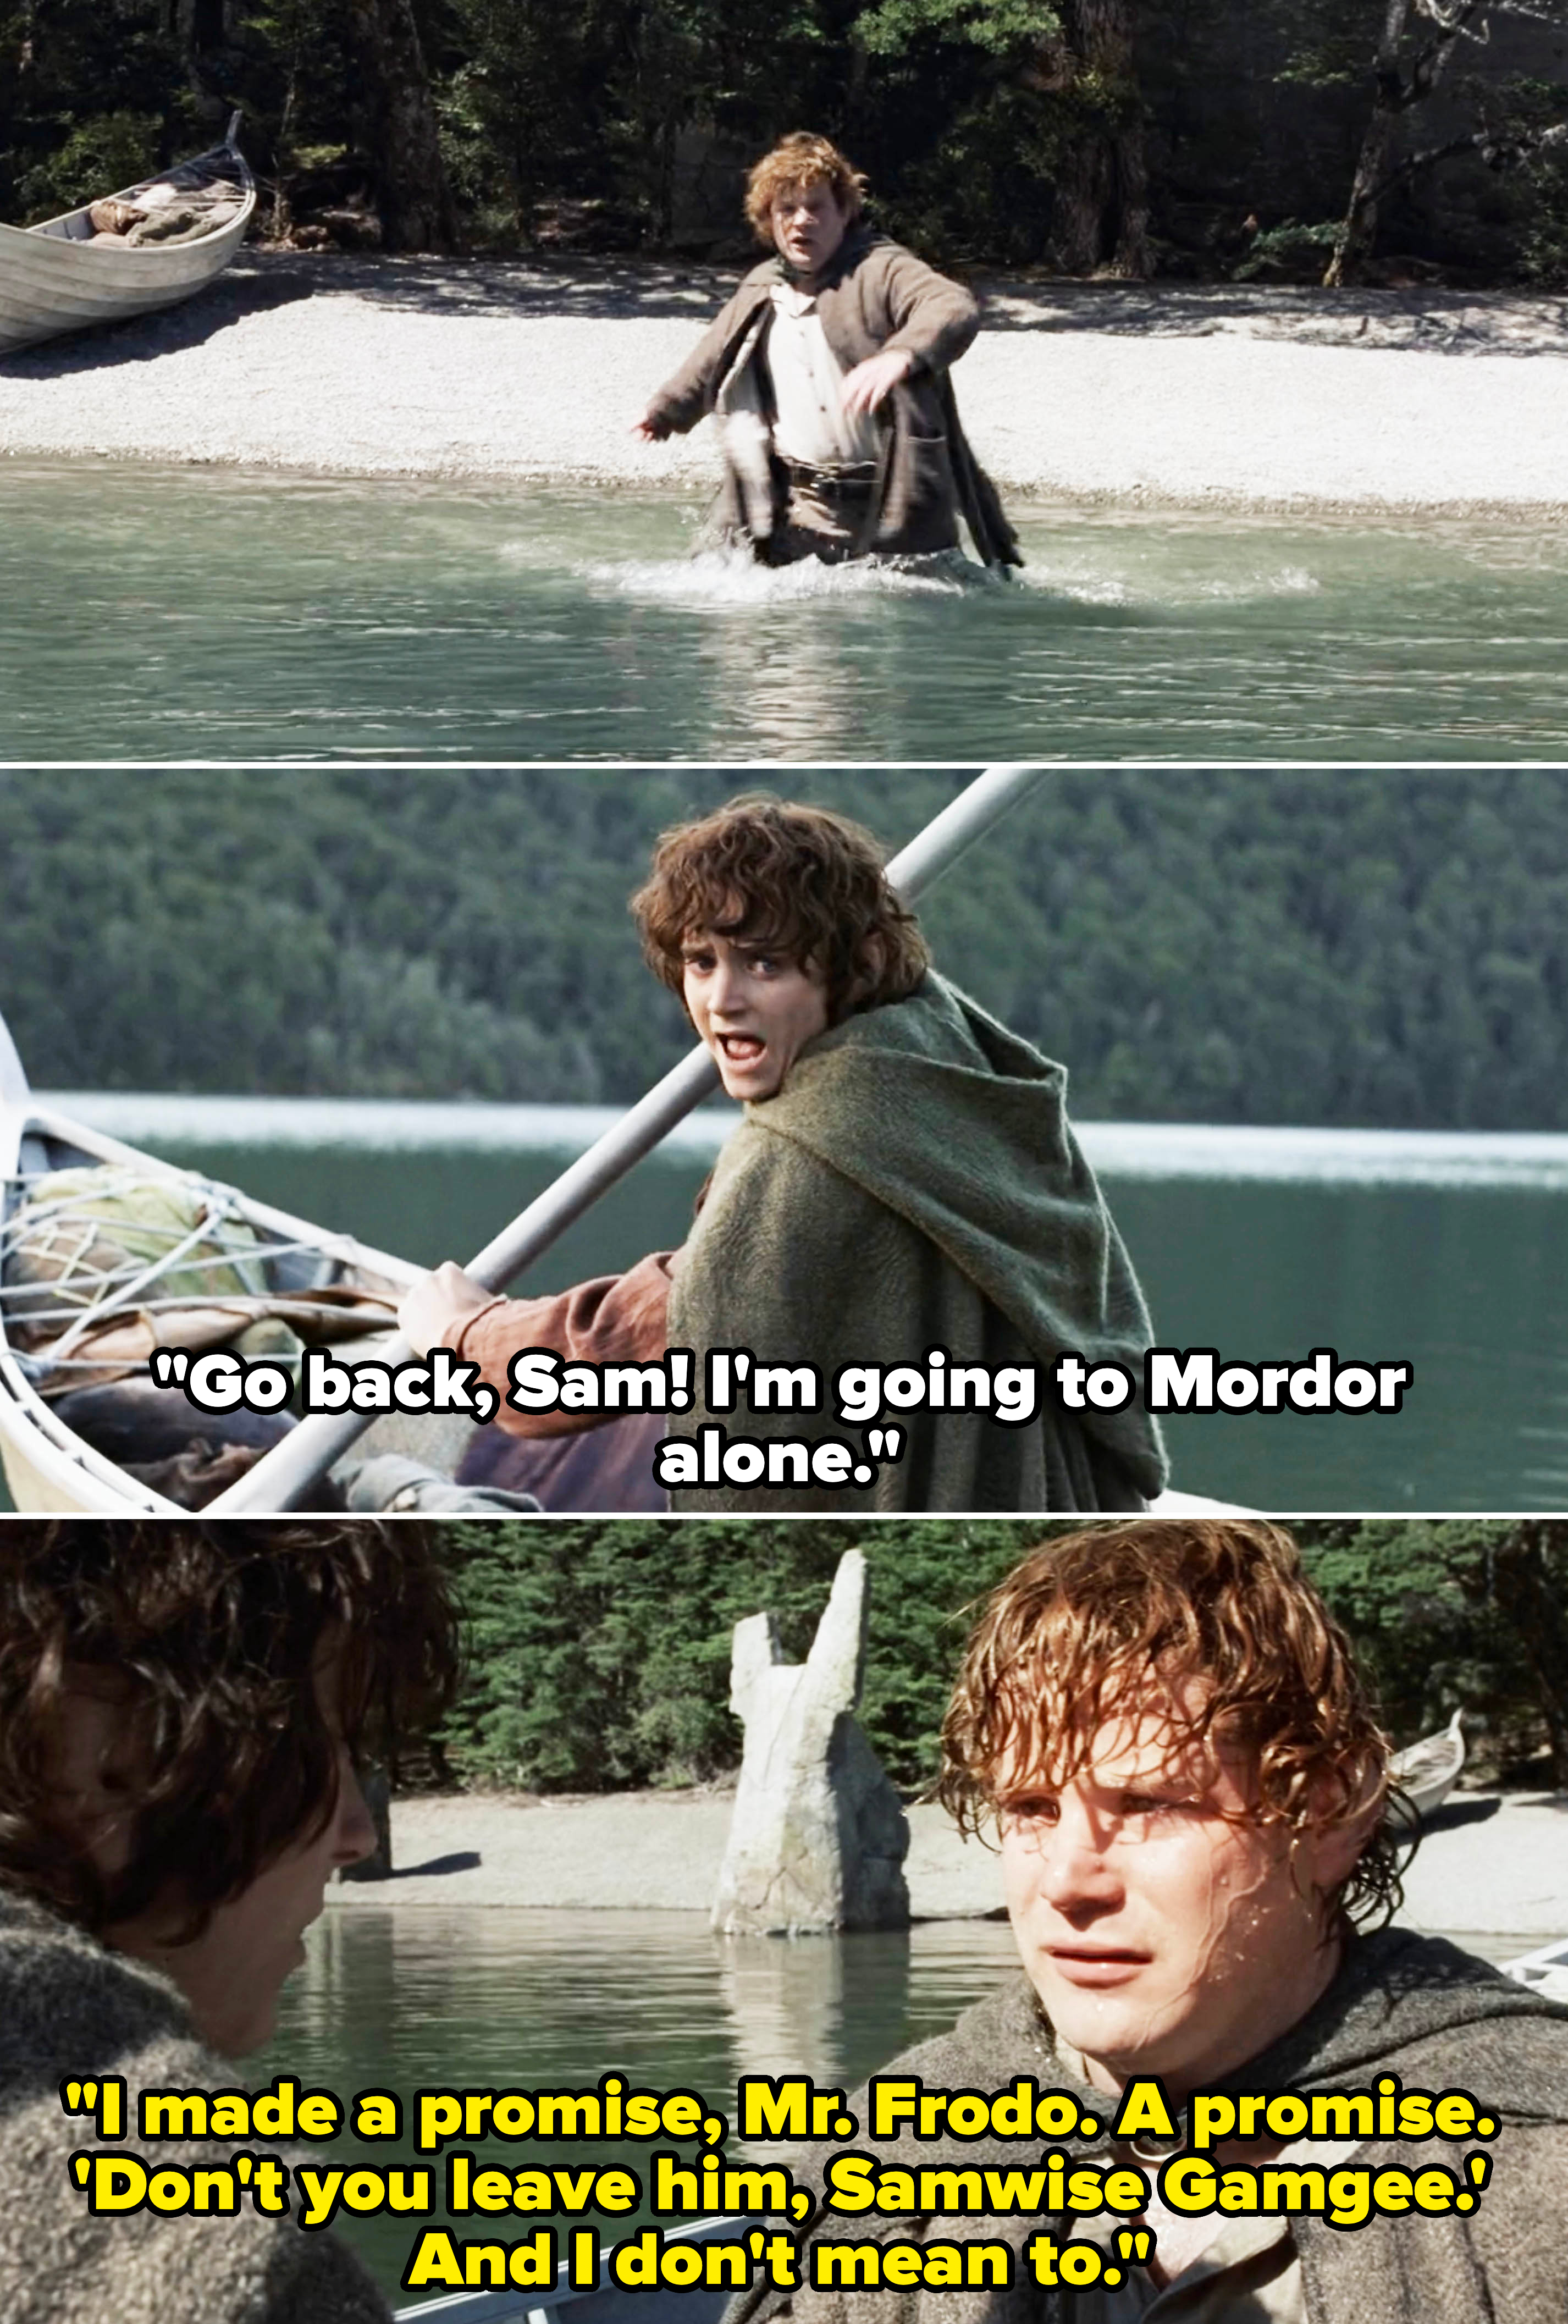 Samwise and Frodo in a boat and having an emotional conversation by a lakeshore